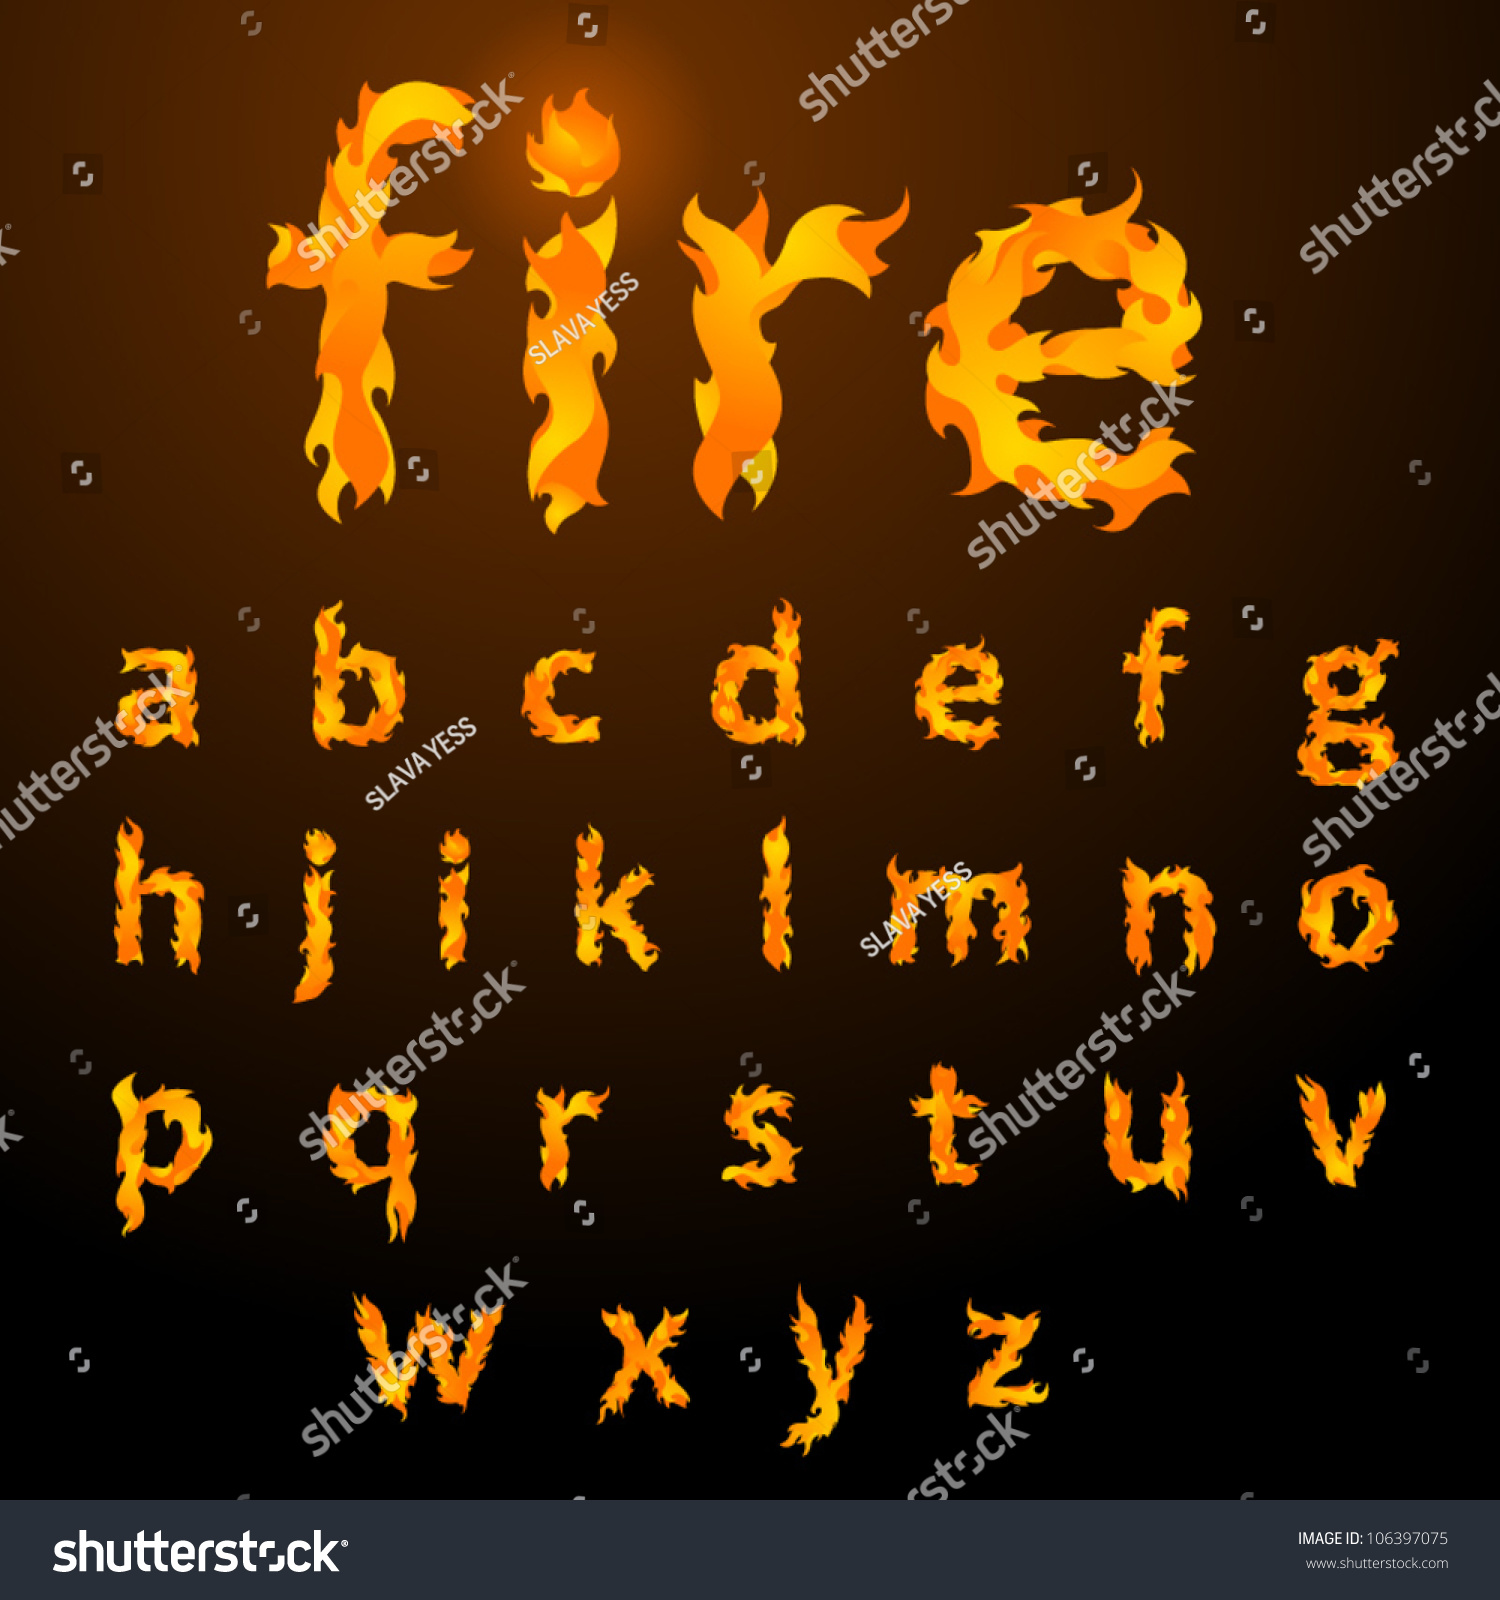 Vector Fire Flame Font Small Letters - 106397075 : Shutterstock